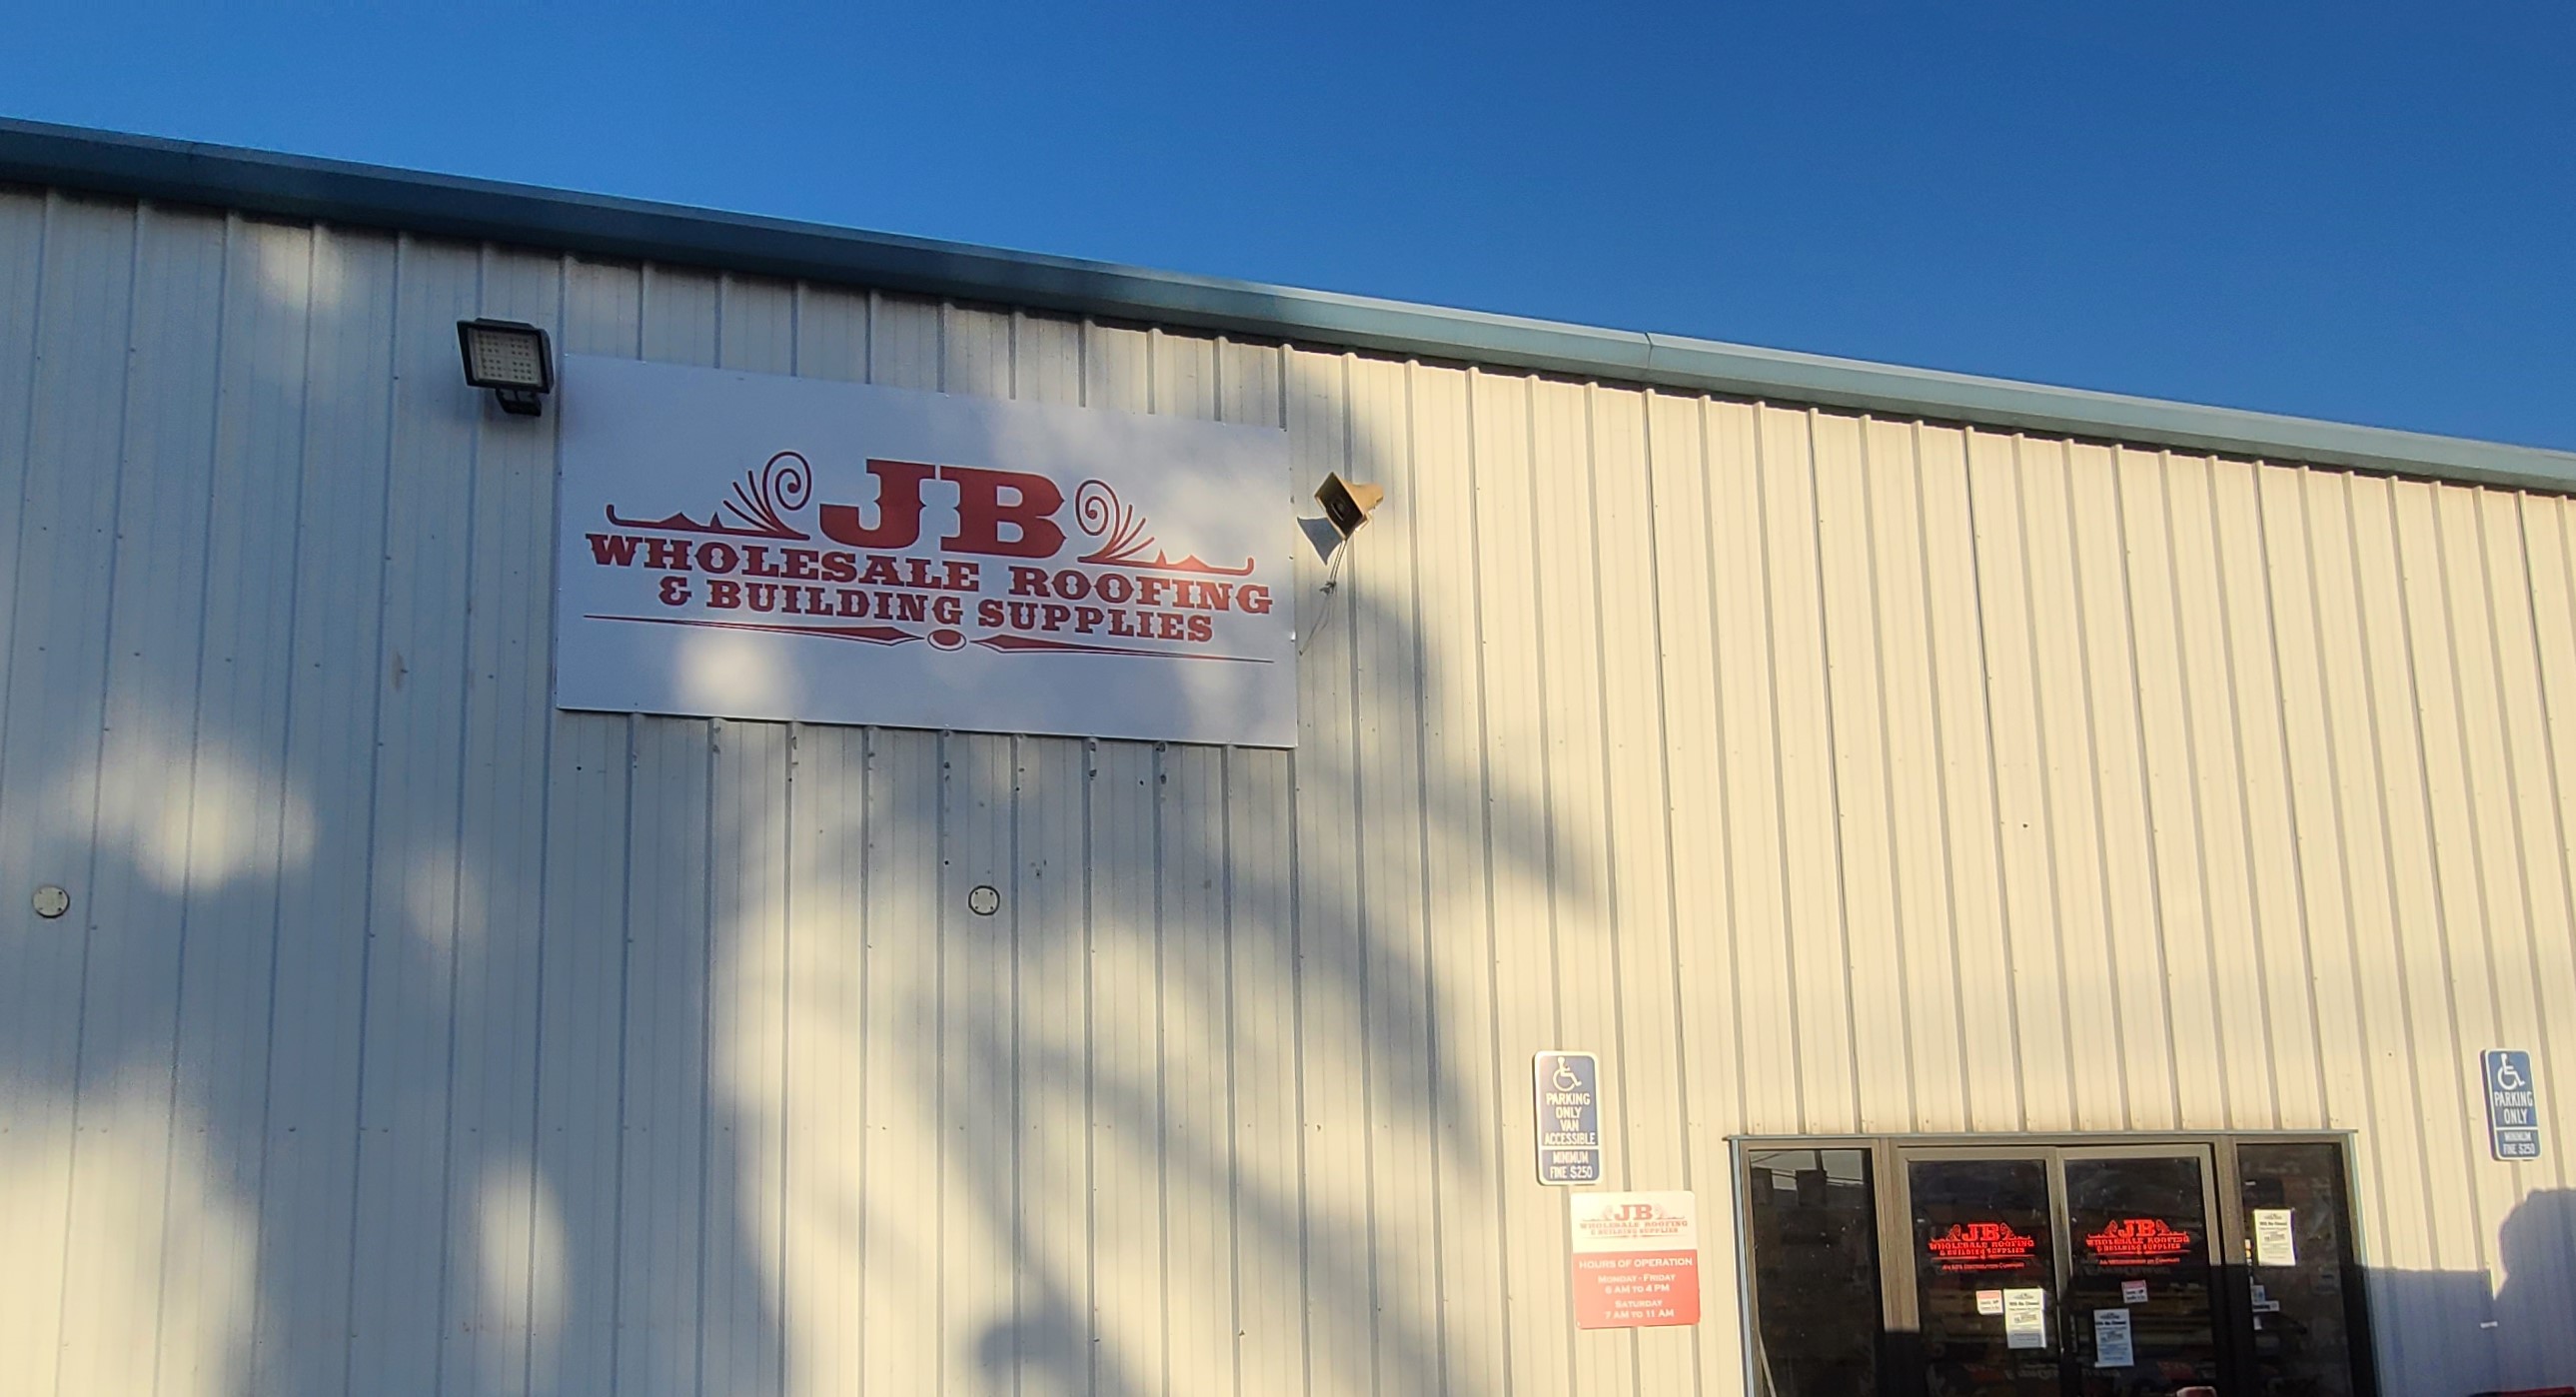 These are the exterior building signs we fabricated and installed for JB Wholesale's Pomona location.